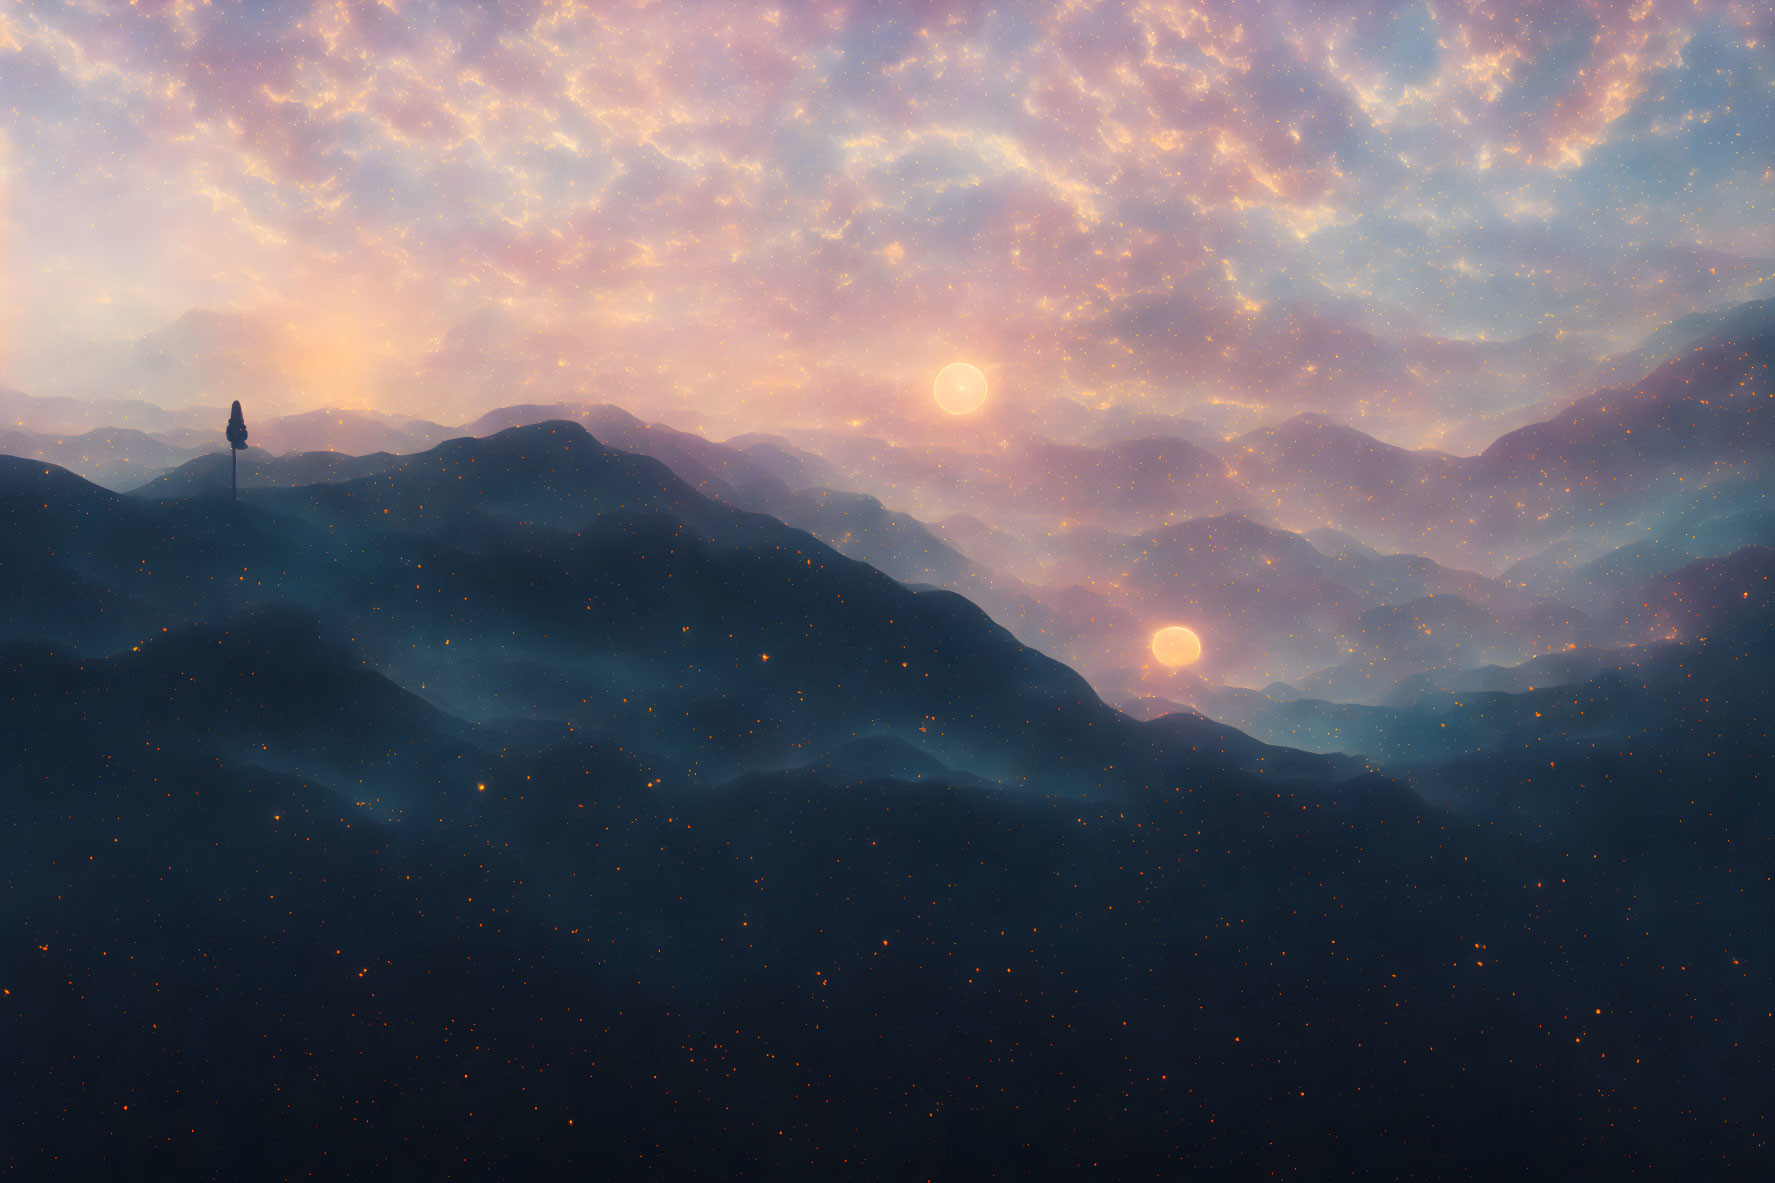 Solitary figure on misty mountain under cosmic sky with two suns